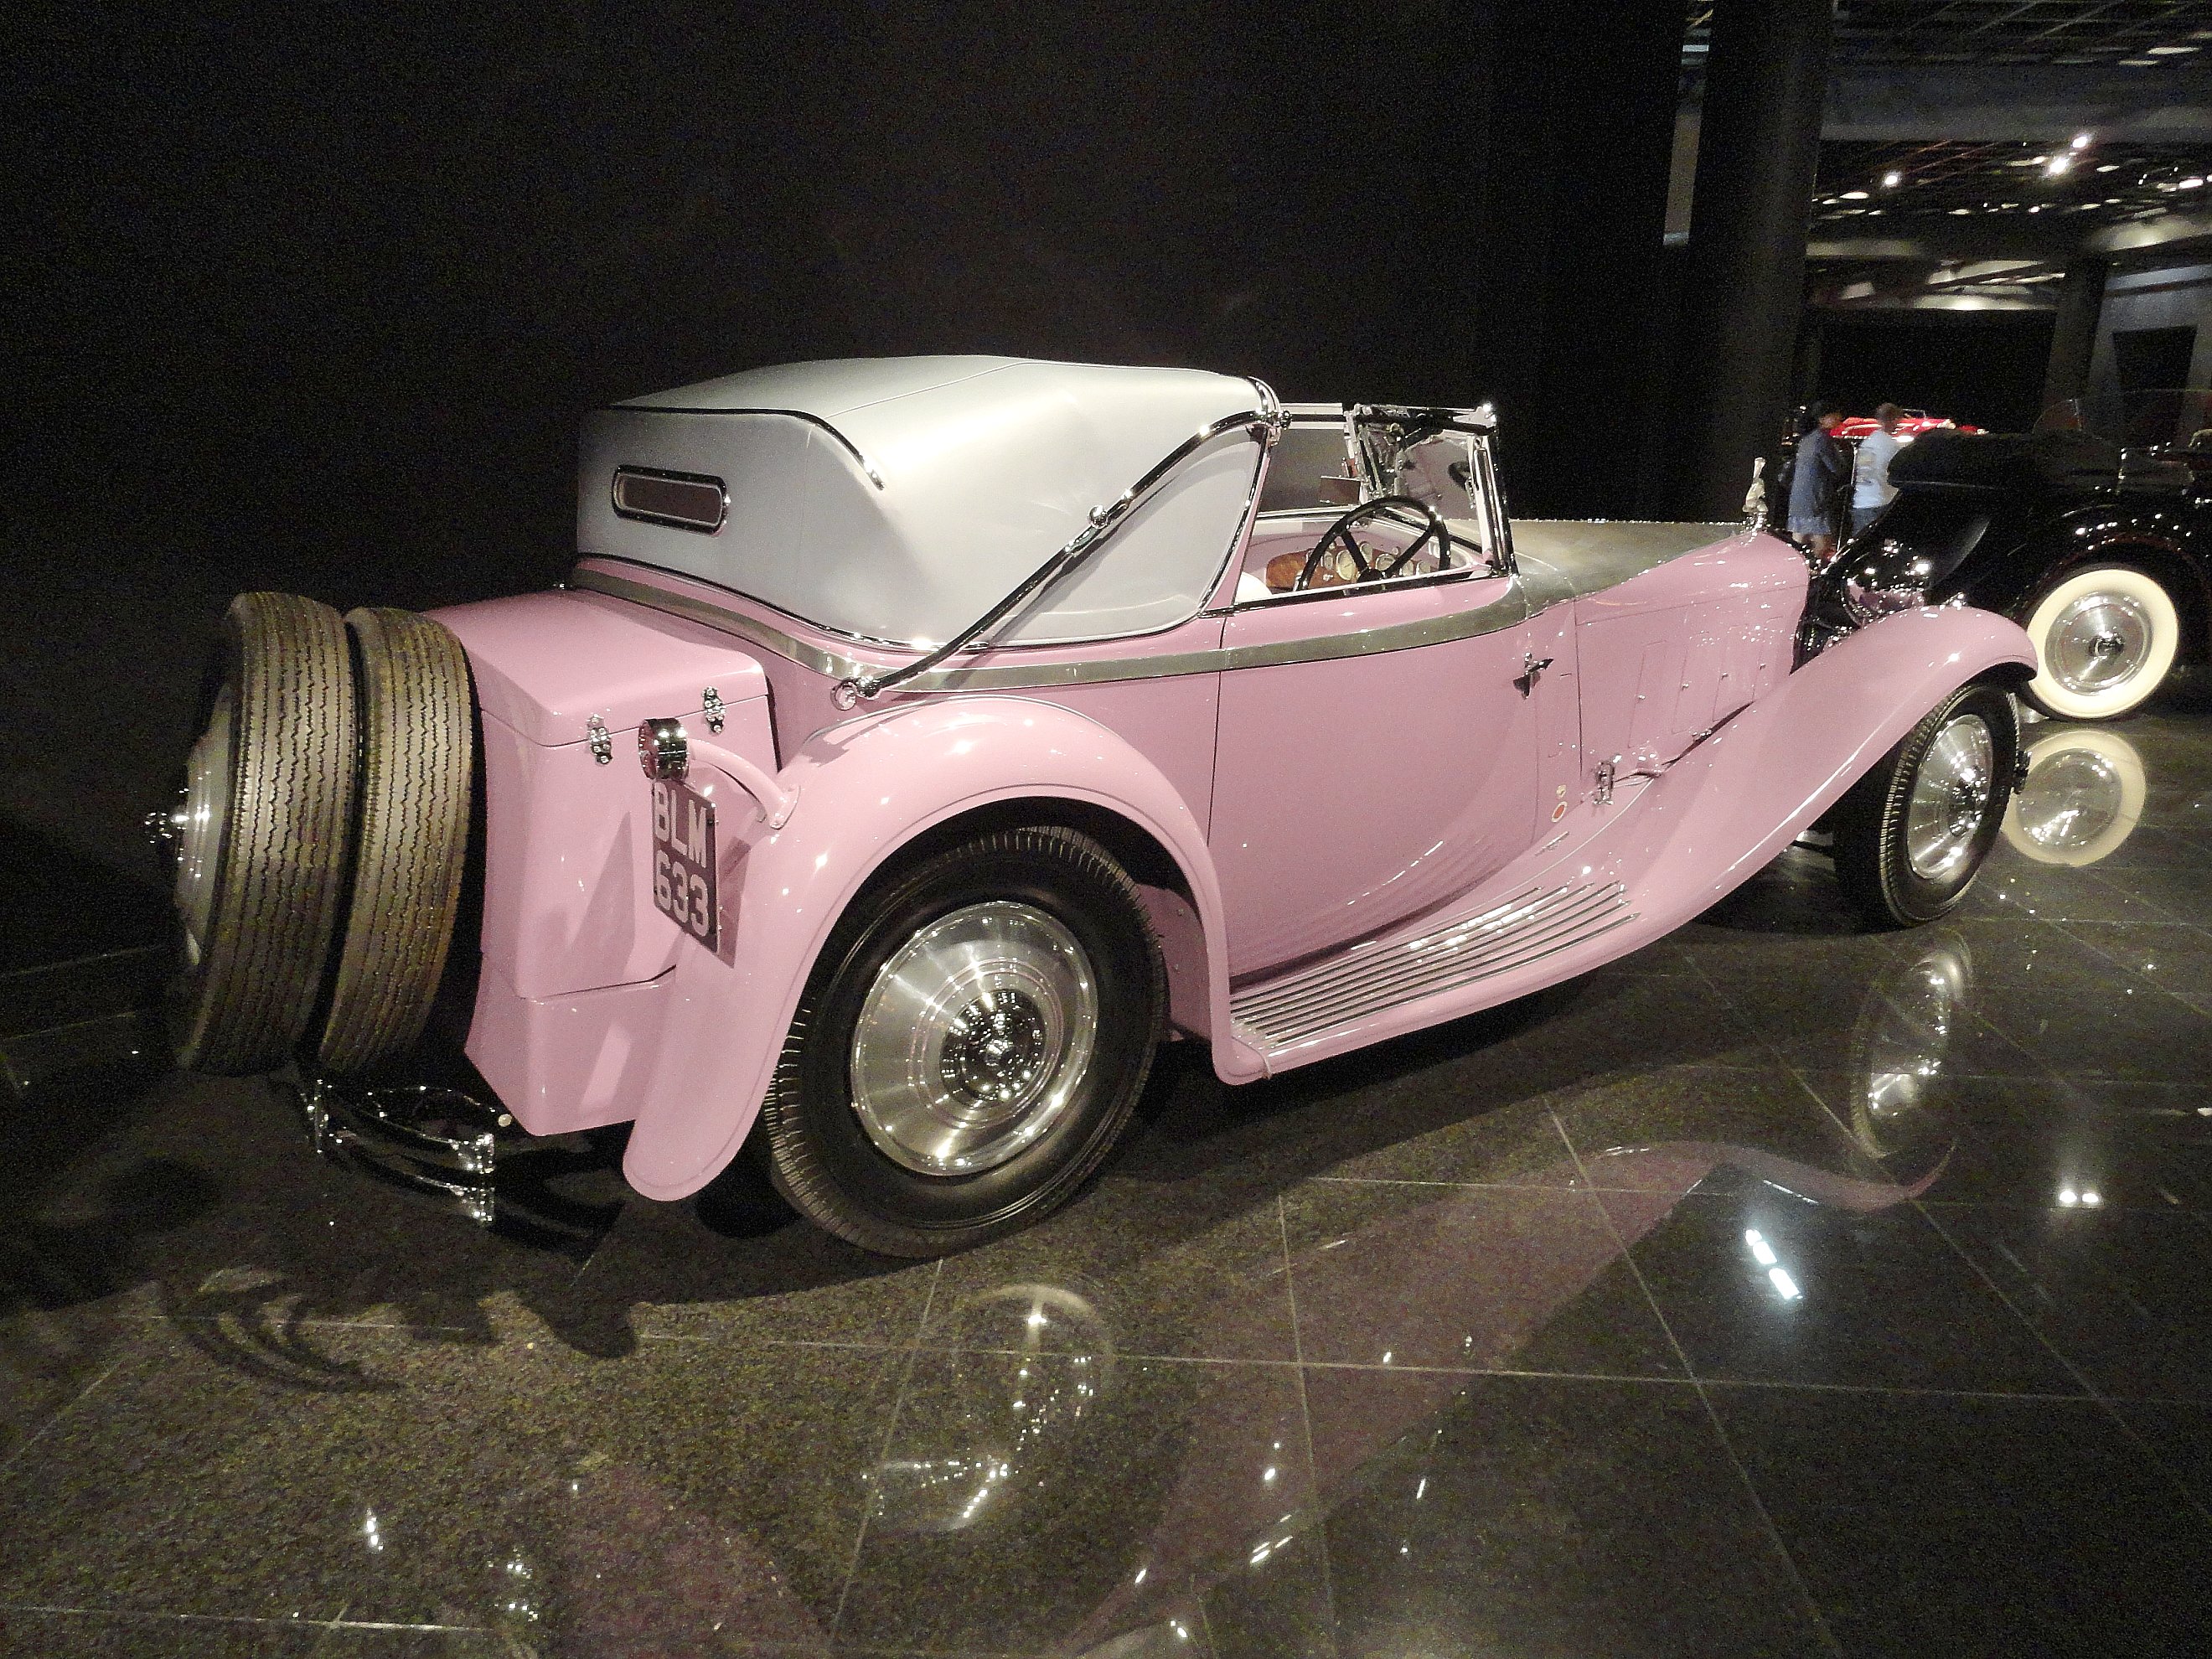 1934 Delage D8SS Cabriolet, 1 of 1 ever created | Flickr - Photo ...